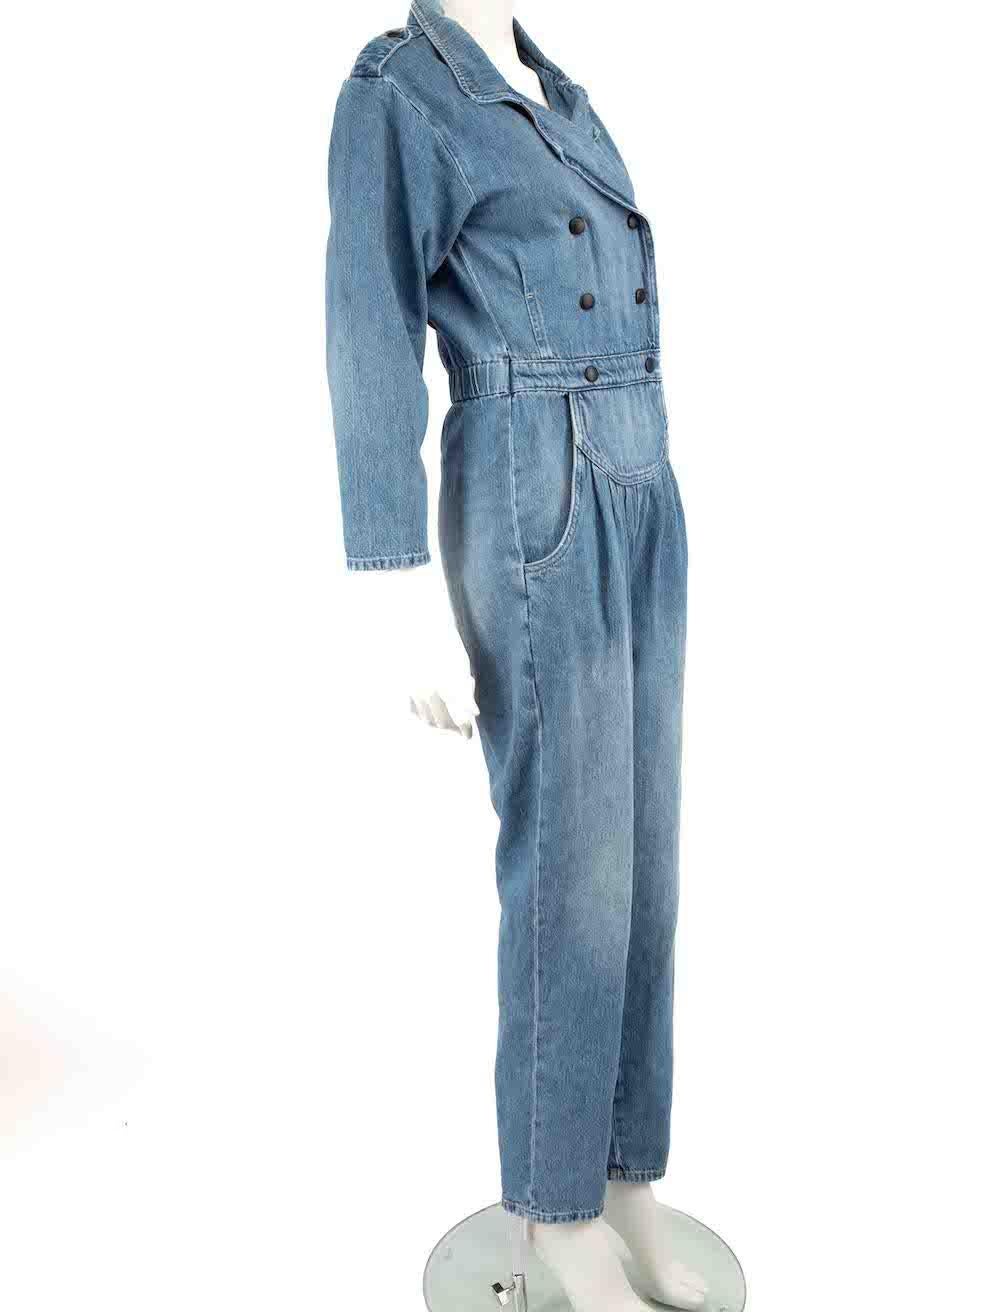 CONDITION is Very good. Minimal wear to jumpsuit is evident. A small hole is seen near one of the front button on this used Frame designer resale item. Please note that the hem finishing is purposely distressed.
 
 Details
 Blue
 Denim
 Jumpsuit
